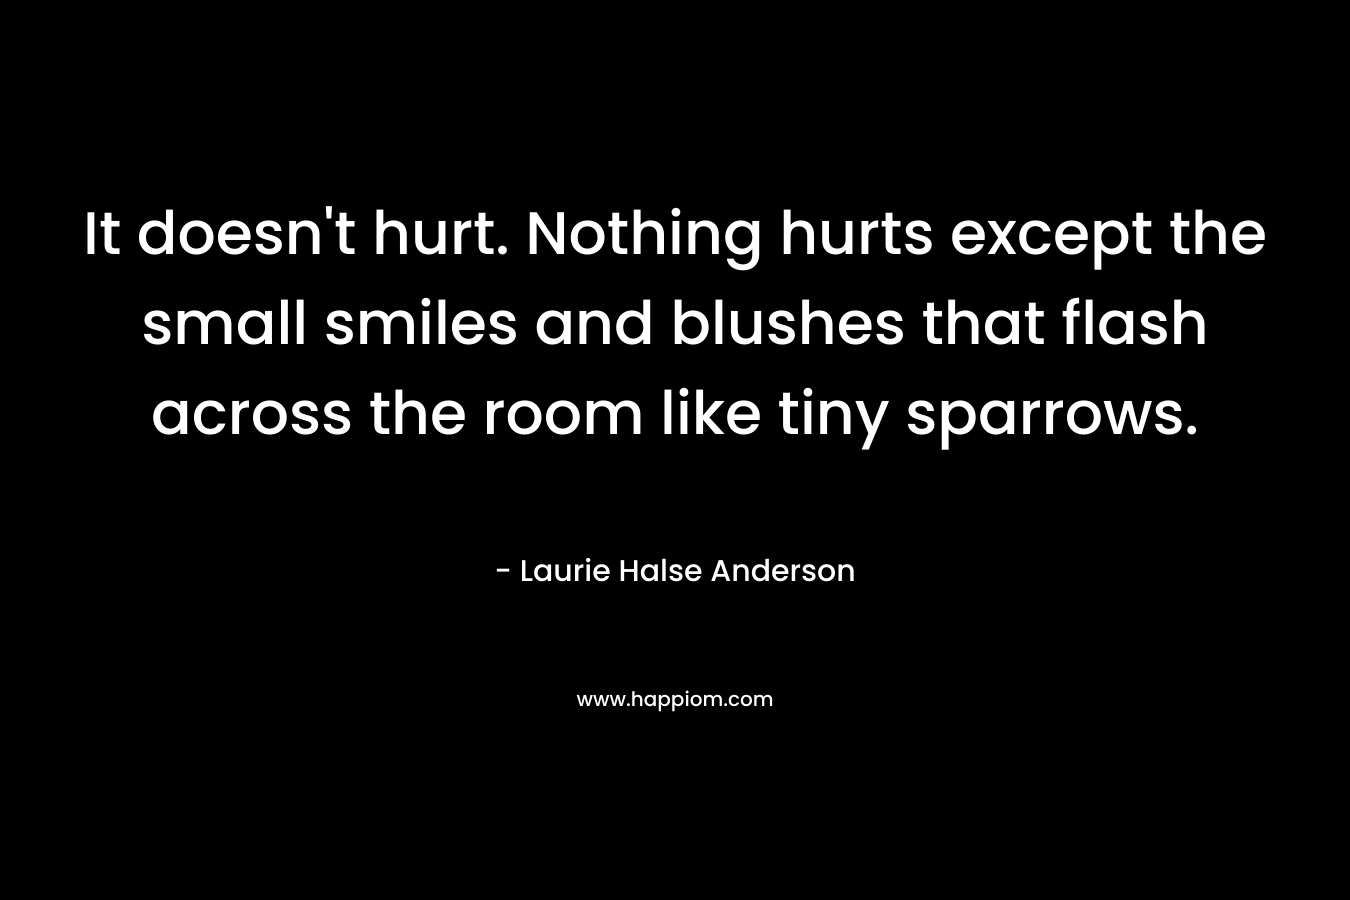 It doesn't hurt. Nothing hurts except the small smiles and blushes that flash across the room like tiny sparrows.